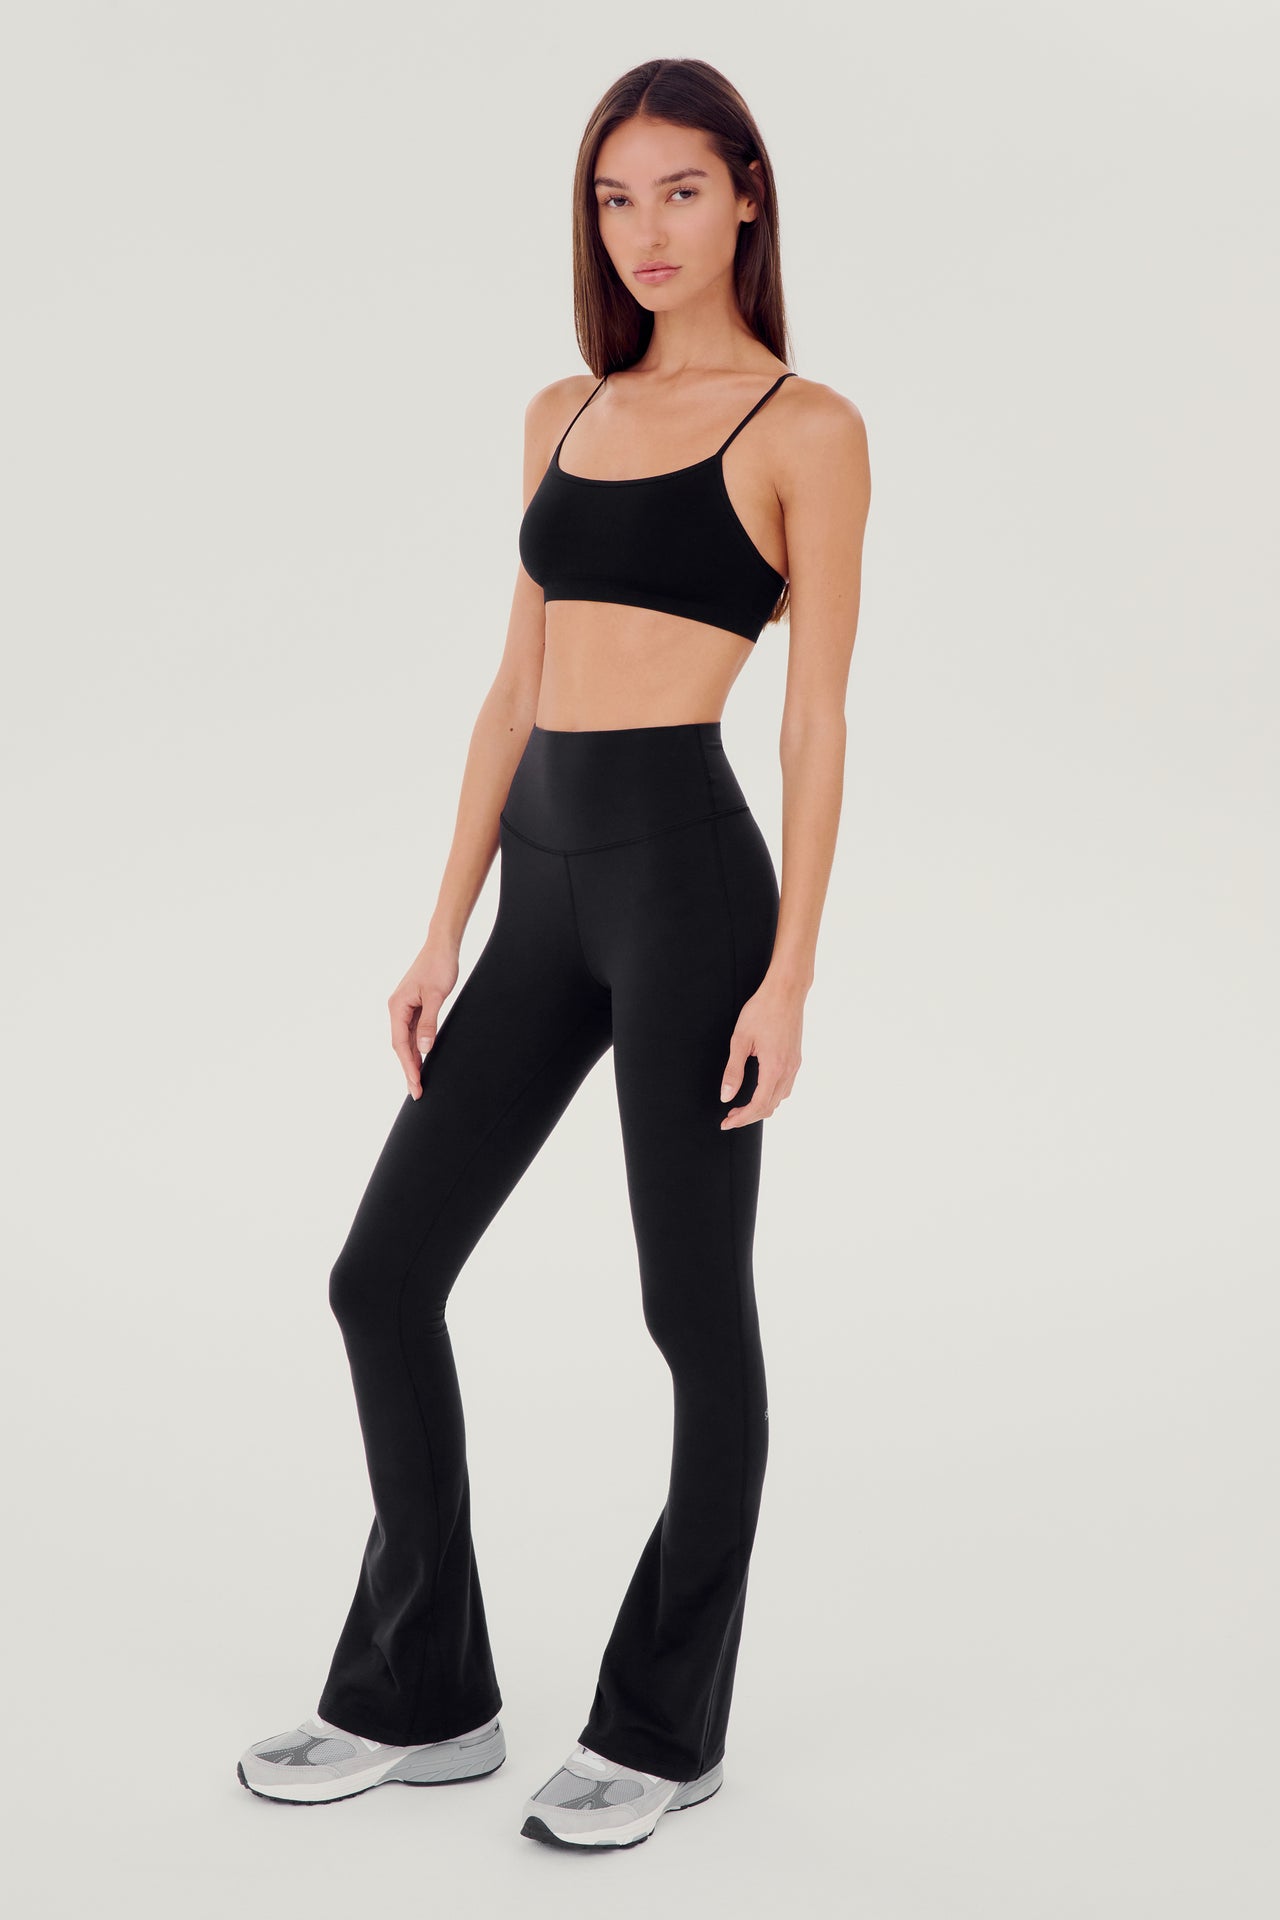 A woman in SPLITS59's Raquel High Waist Flared Legging - Black and black high-waist pants designed for 4-way stretch, perfect for gym workouts.